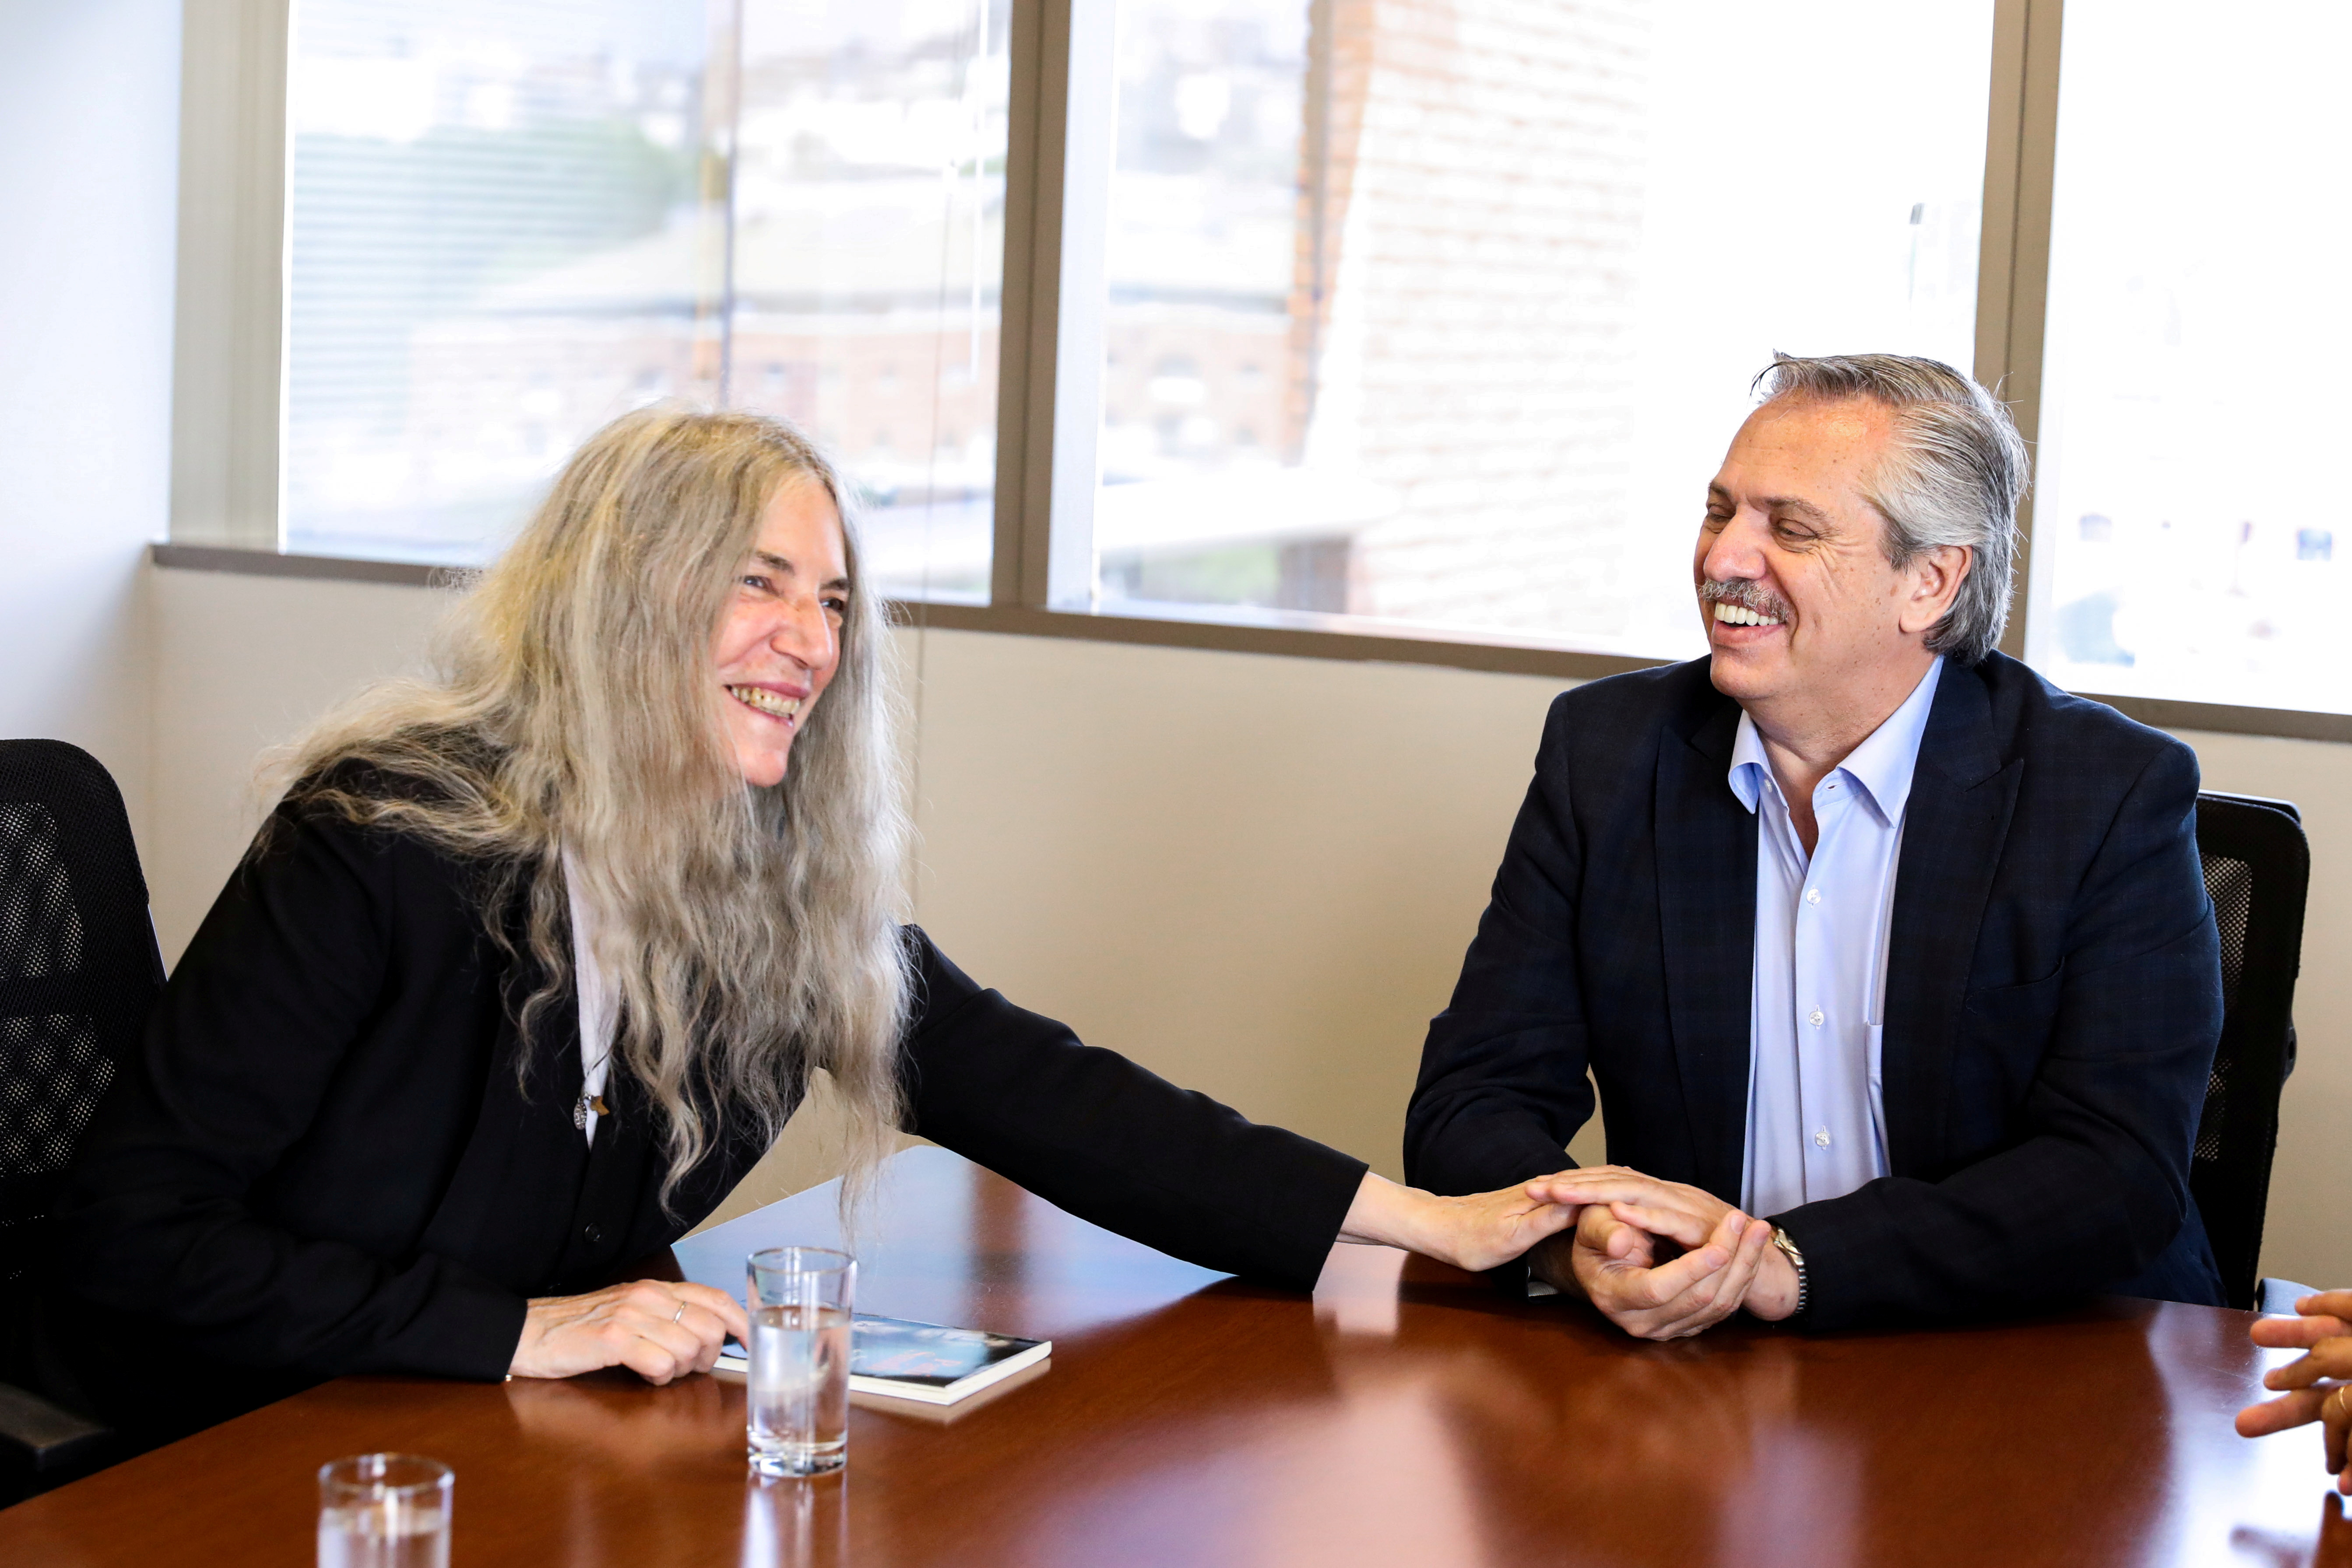 Musician Patti Smith and Argentina's President-elect Alberto Fernandez meet at Fernandez' office, in Buenos Aires